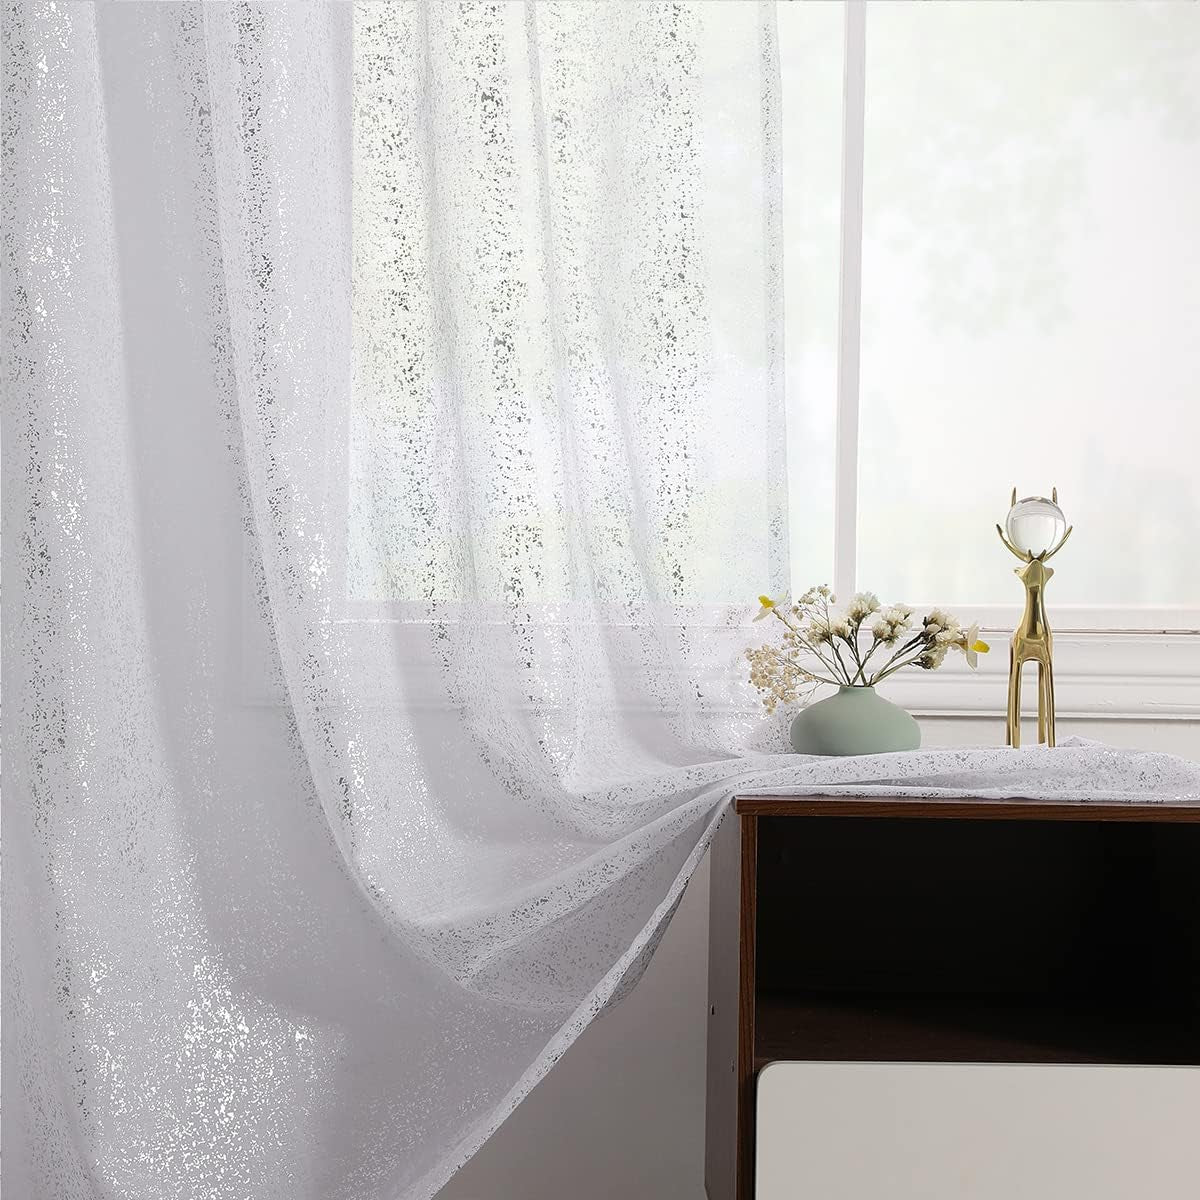 Silver Sheer Curtains 84 Inch Long - Chic Sparkle Curtains for Living Room, Rod Pocket Glitter Sheer Curtains for Windows Privacy Silver Grey Sheer Panels, 52 X 84 Inch, 2 Panels, Silver Gray  TERLYTEX White Silver W52 X L108 Inch|Pair 